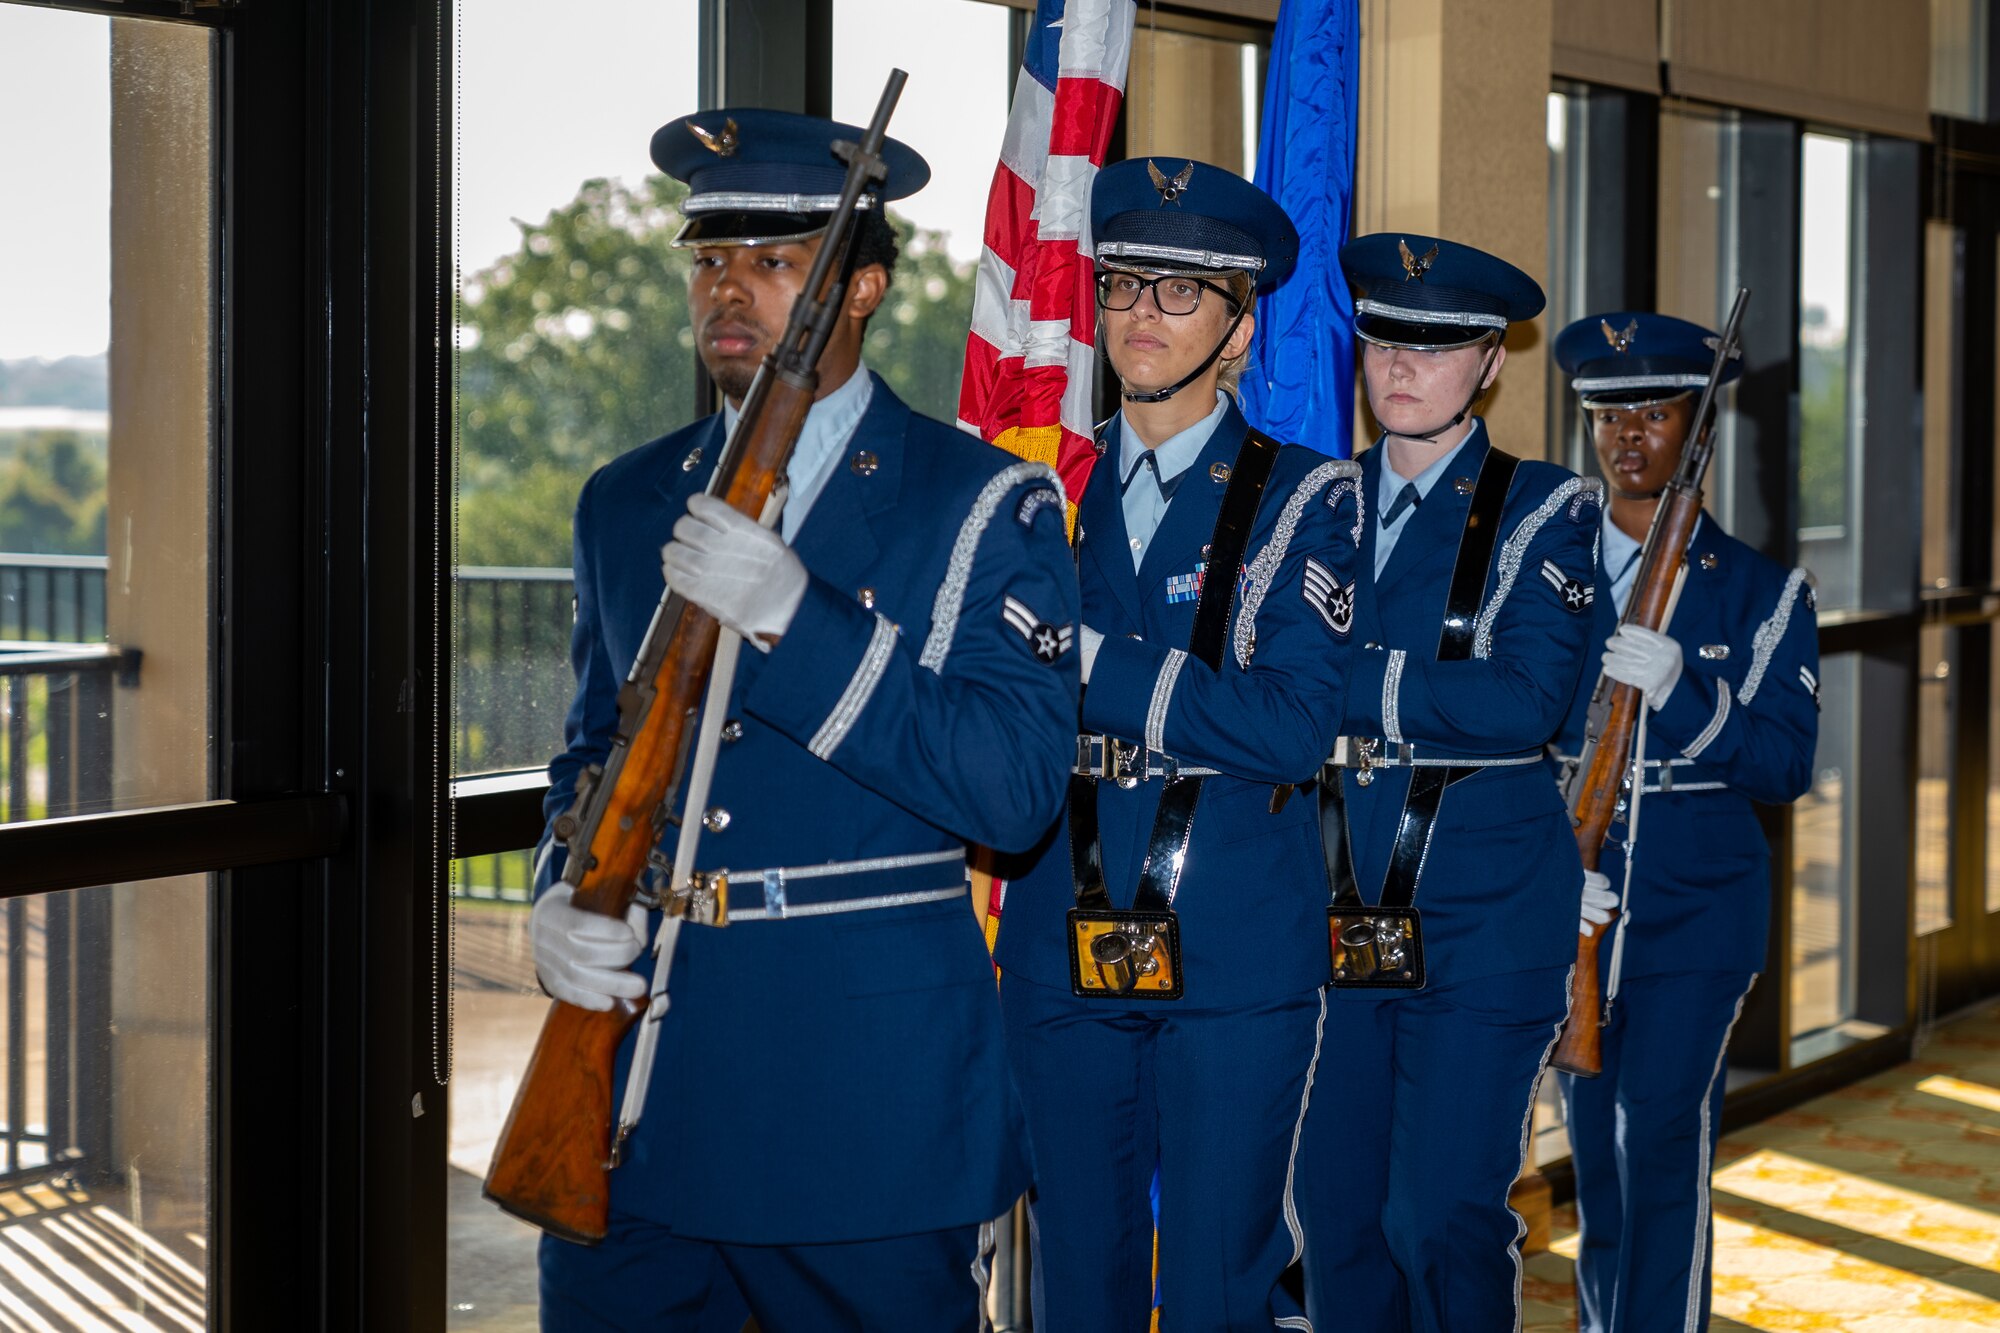 Keesler Air Force Base Honor Guard march to present the colors during the opening ceremony for National Police Week at Keesler Air Force Base, Mississippi, May 15, 2023.